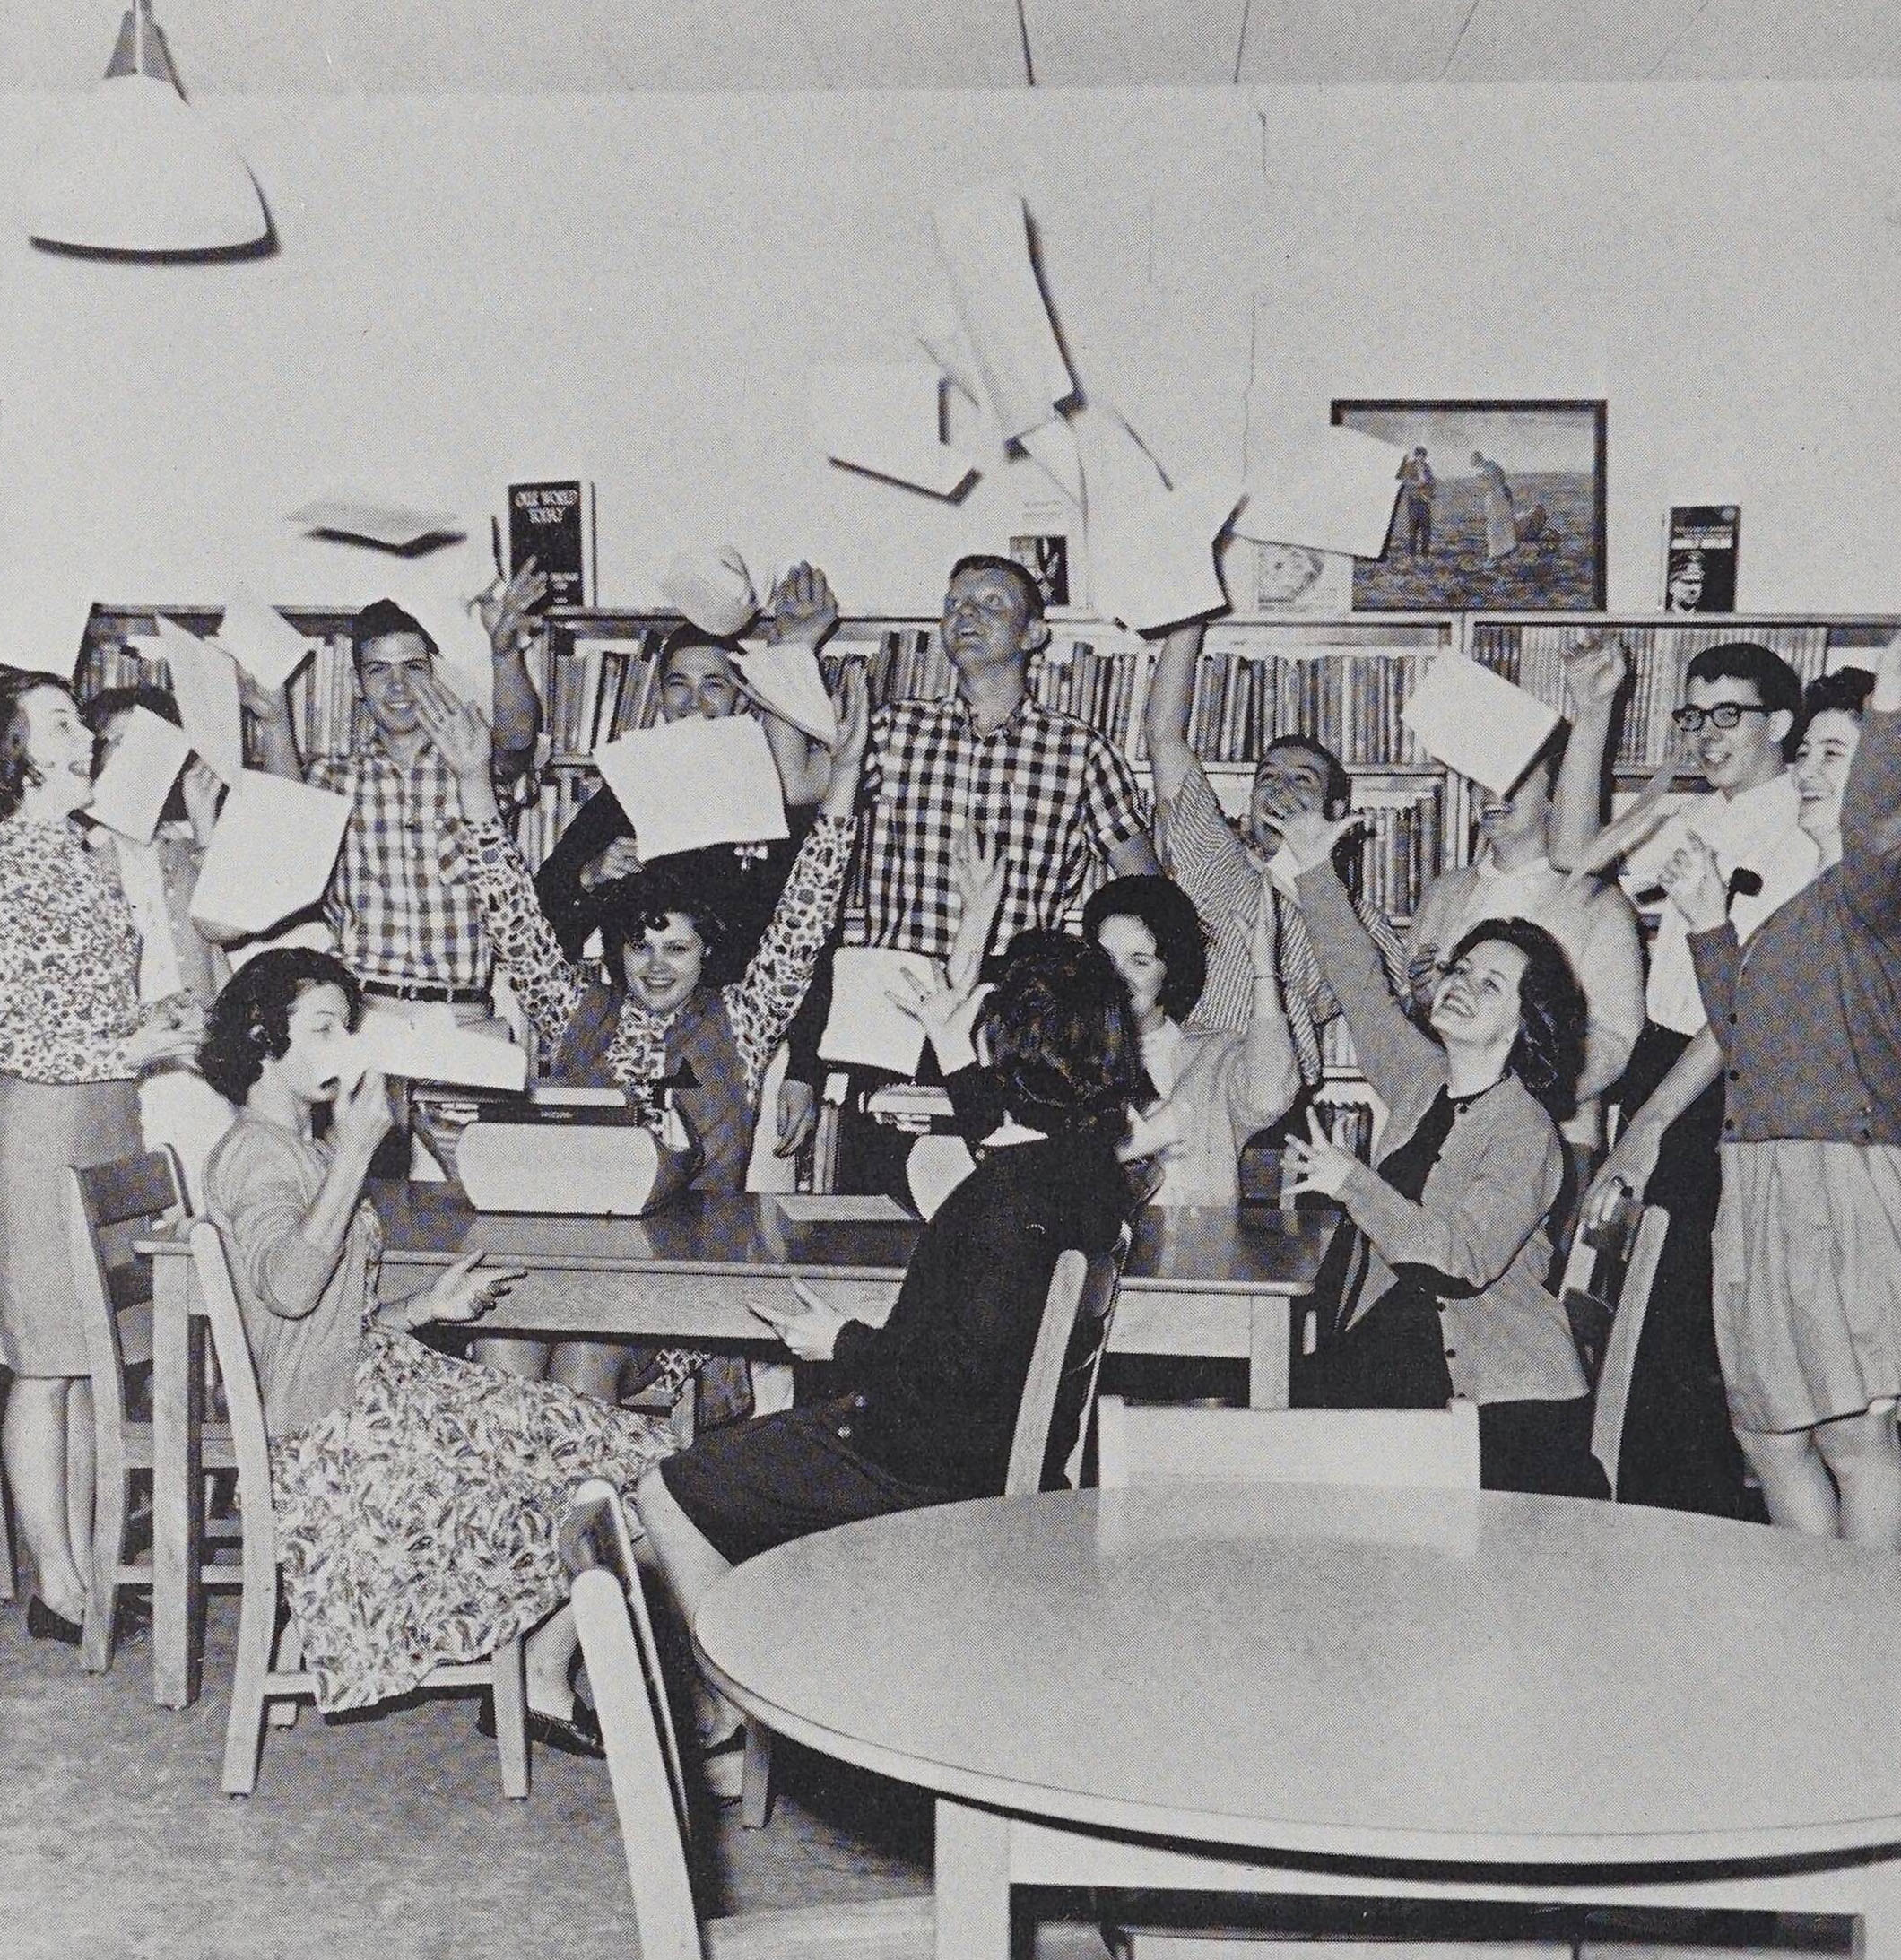 Group of students in 1950s fashion in a classroom throwing papers into the air.